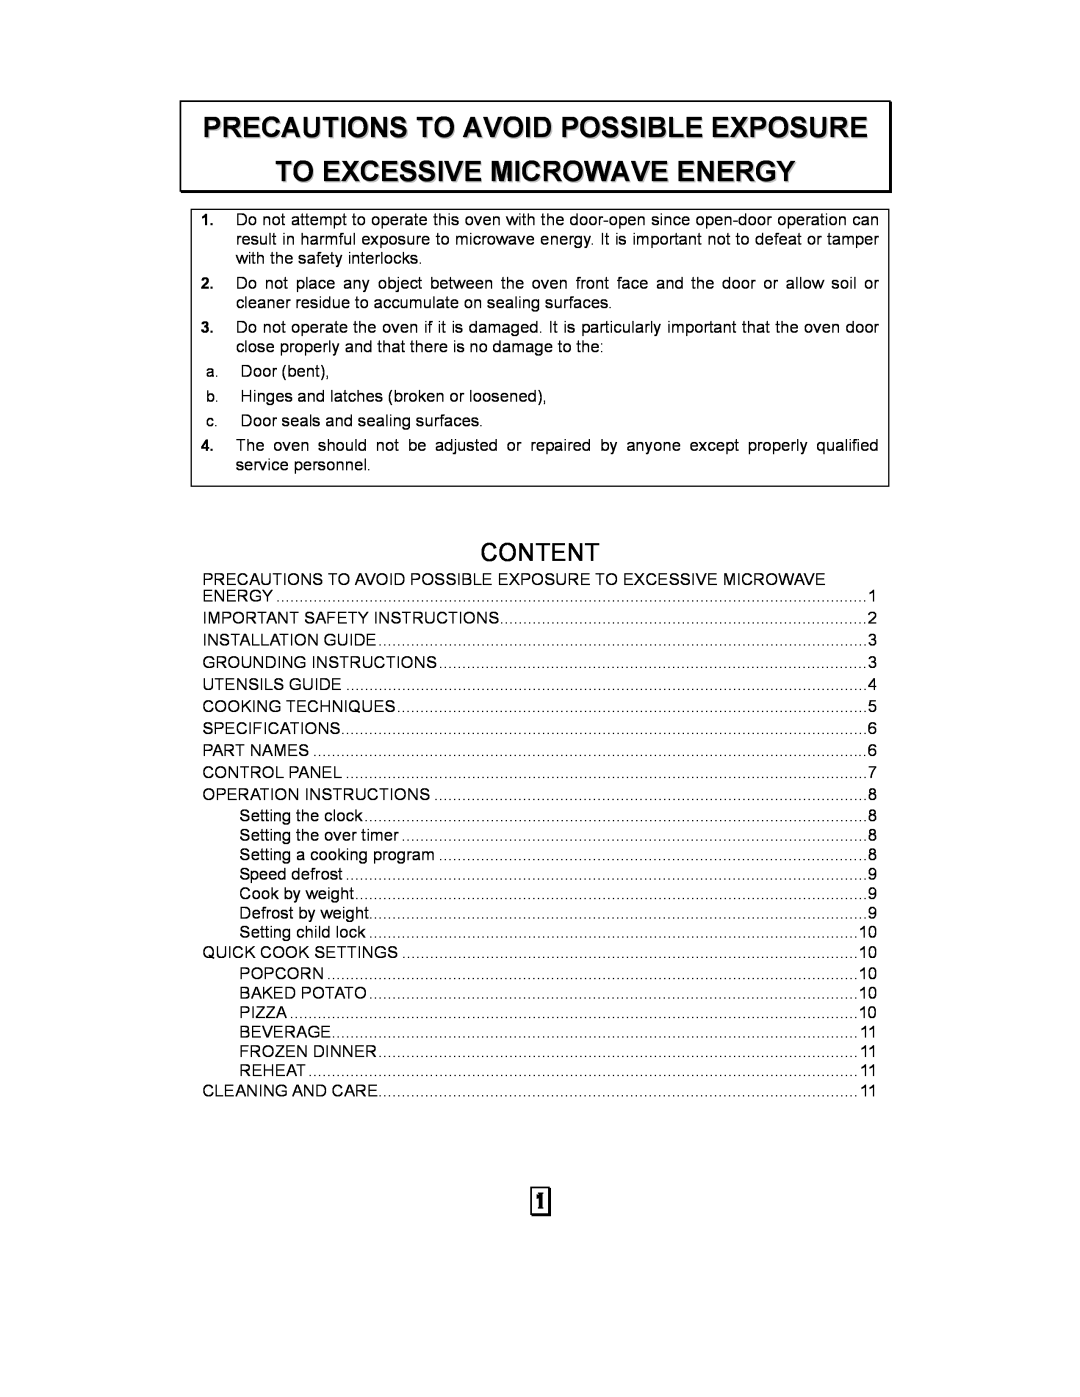 RCA RMW968 manual Precautions To Avoid Possible Exposure To Excessive Microwave Energy, Content 